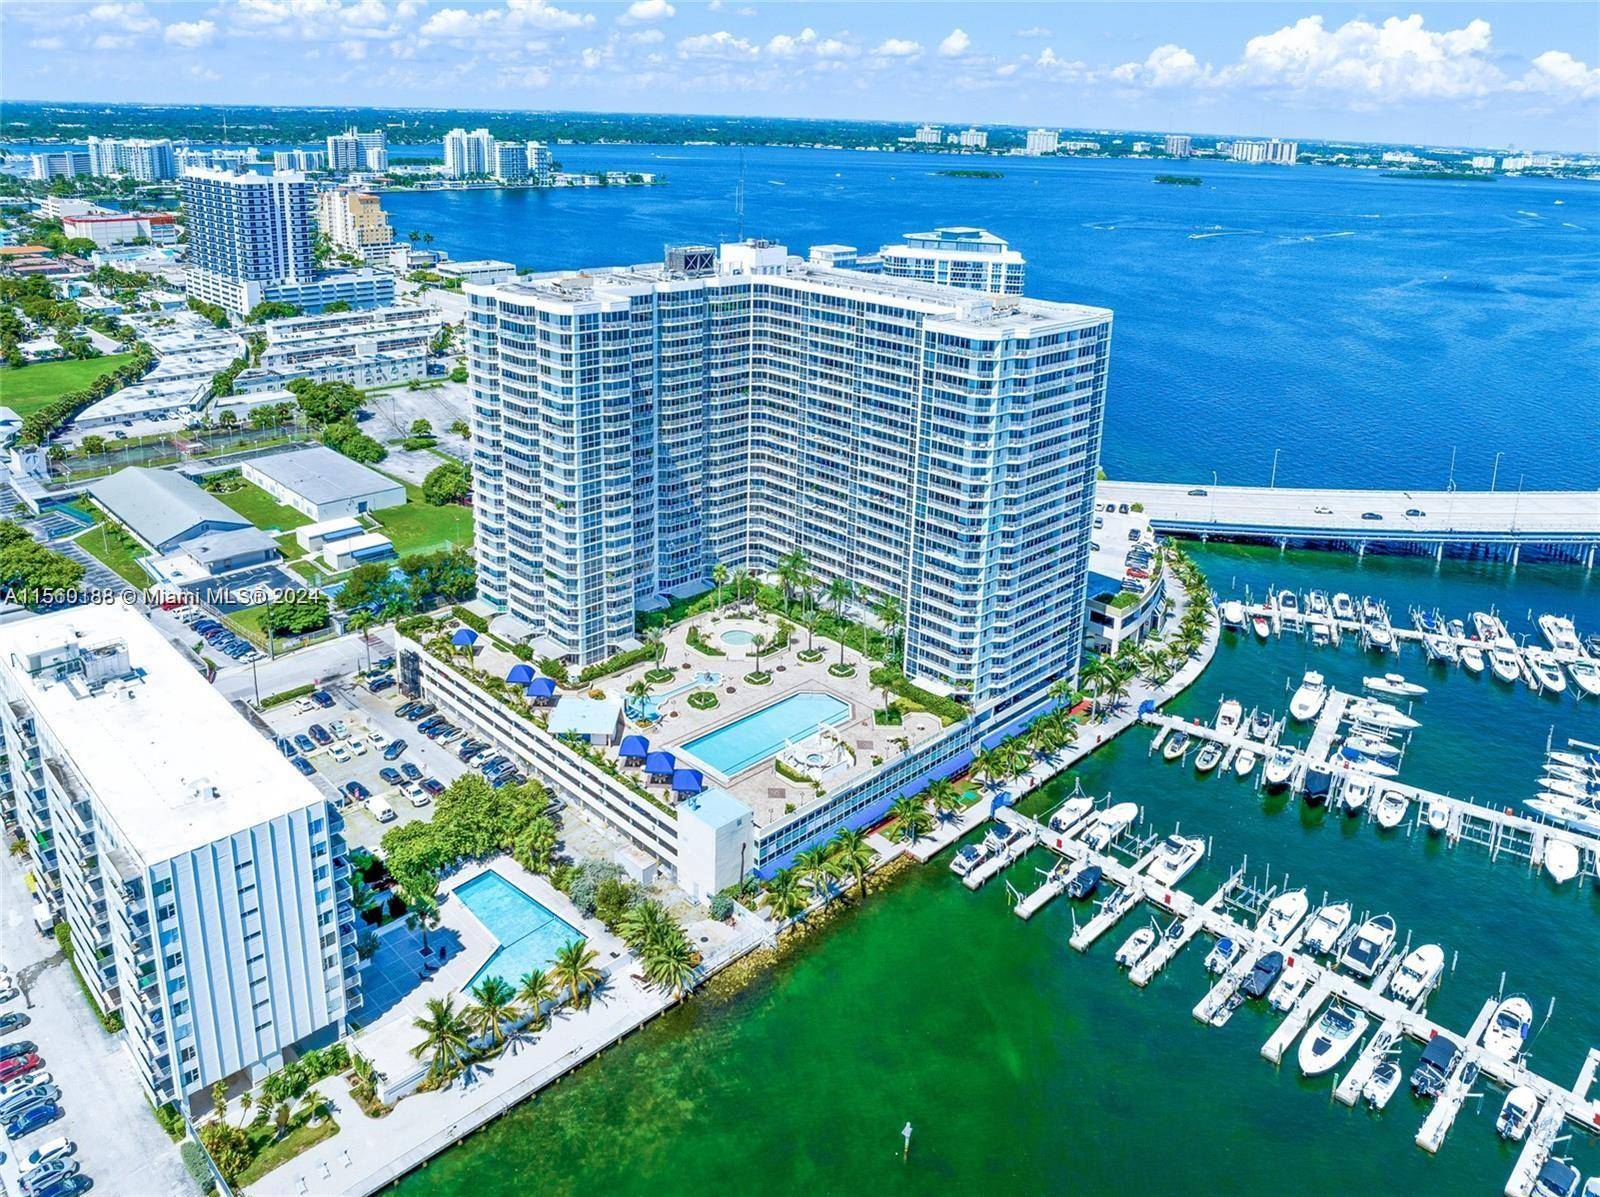 Grandview Palace Condominiums, High Rise Building on the Intercoastal, 2Br 2Ba Corner Unit on the 16th Floor, Amenities include 24 hour Security, Olympic size swimming pool, Convenient Store, Barber, Coffee ...